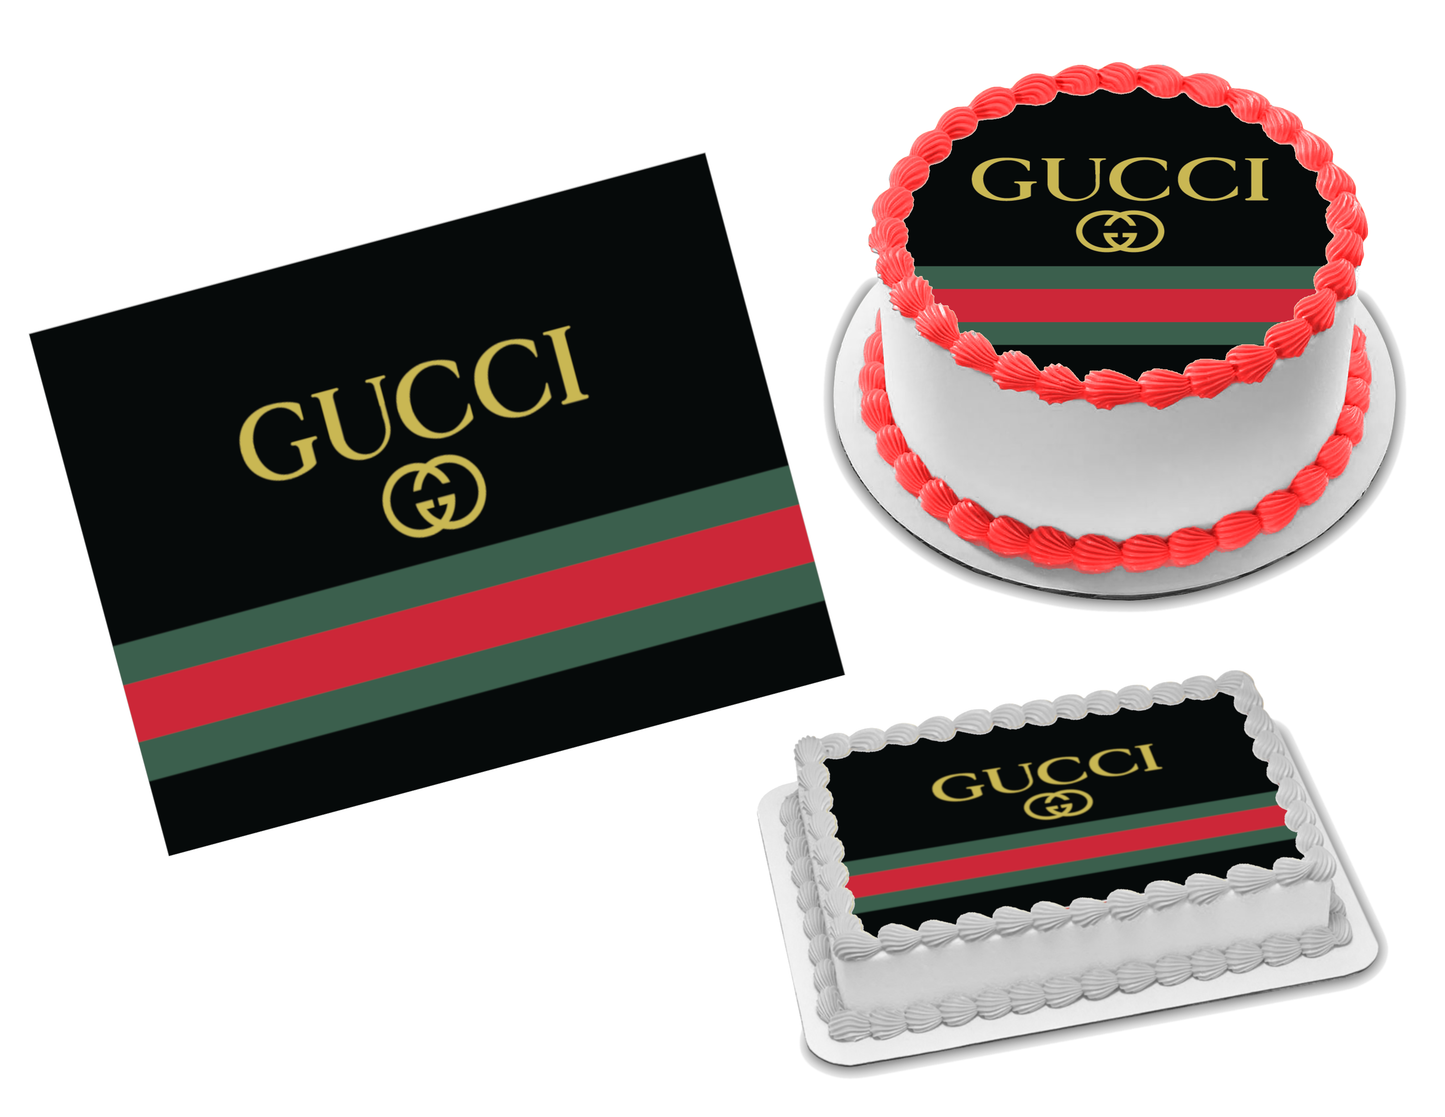 Gucci Edible Image Frosting Sheet #1 (70+ sizes)